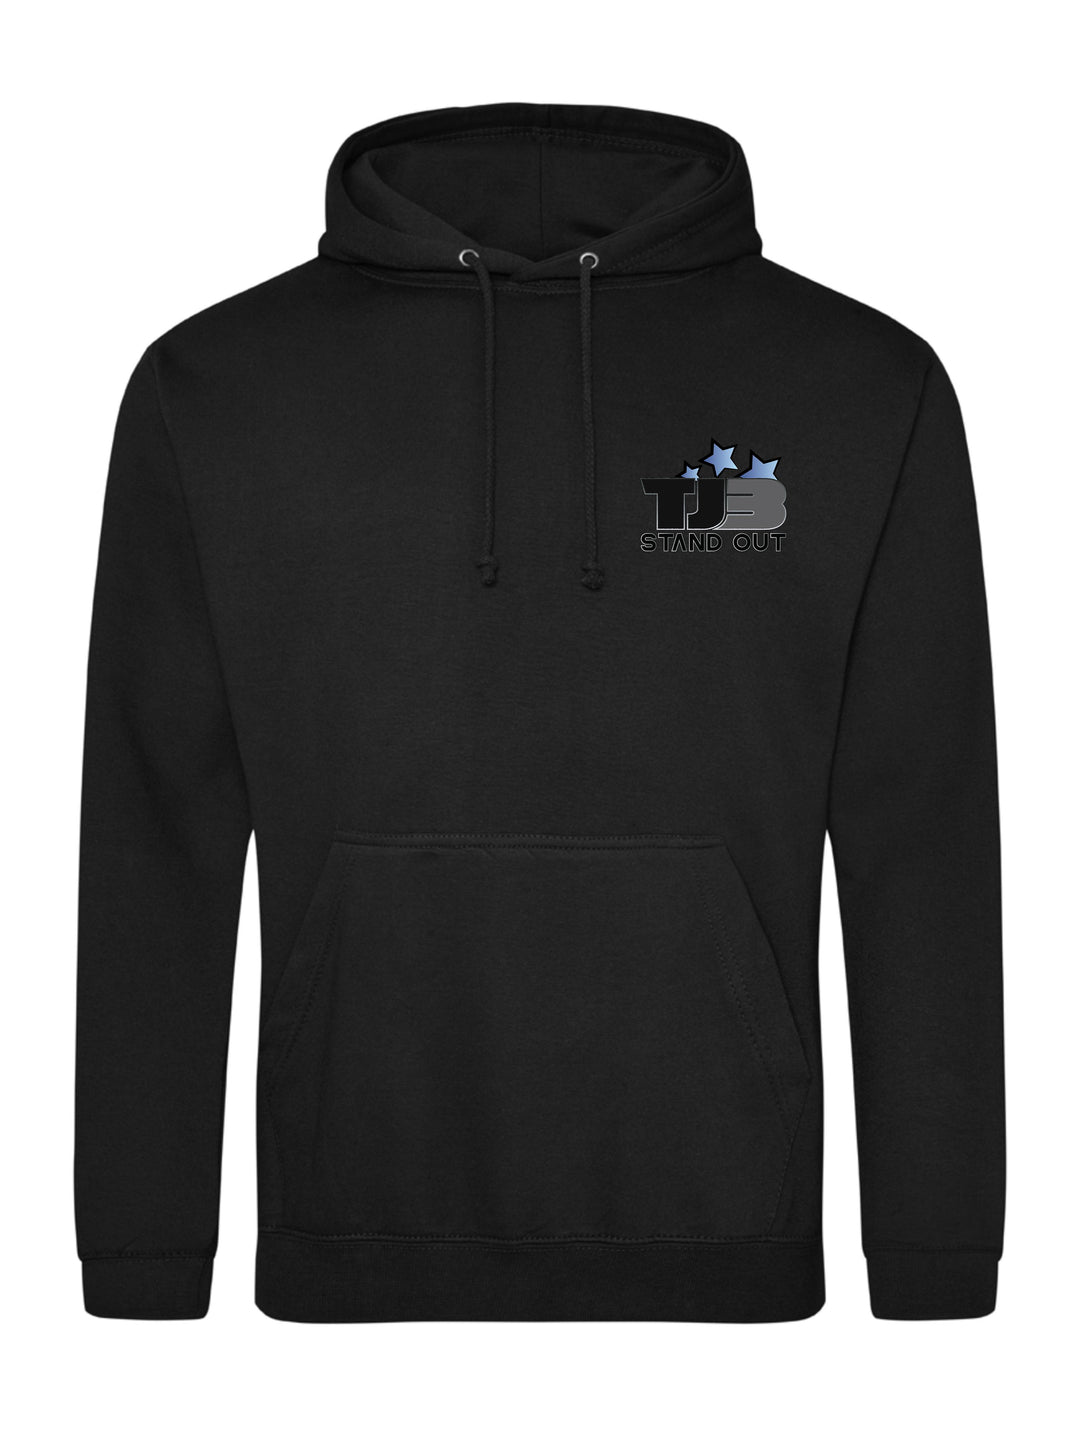 T3 Standout Hoodie